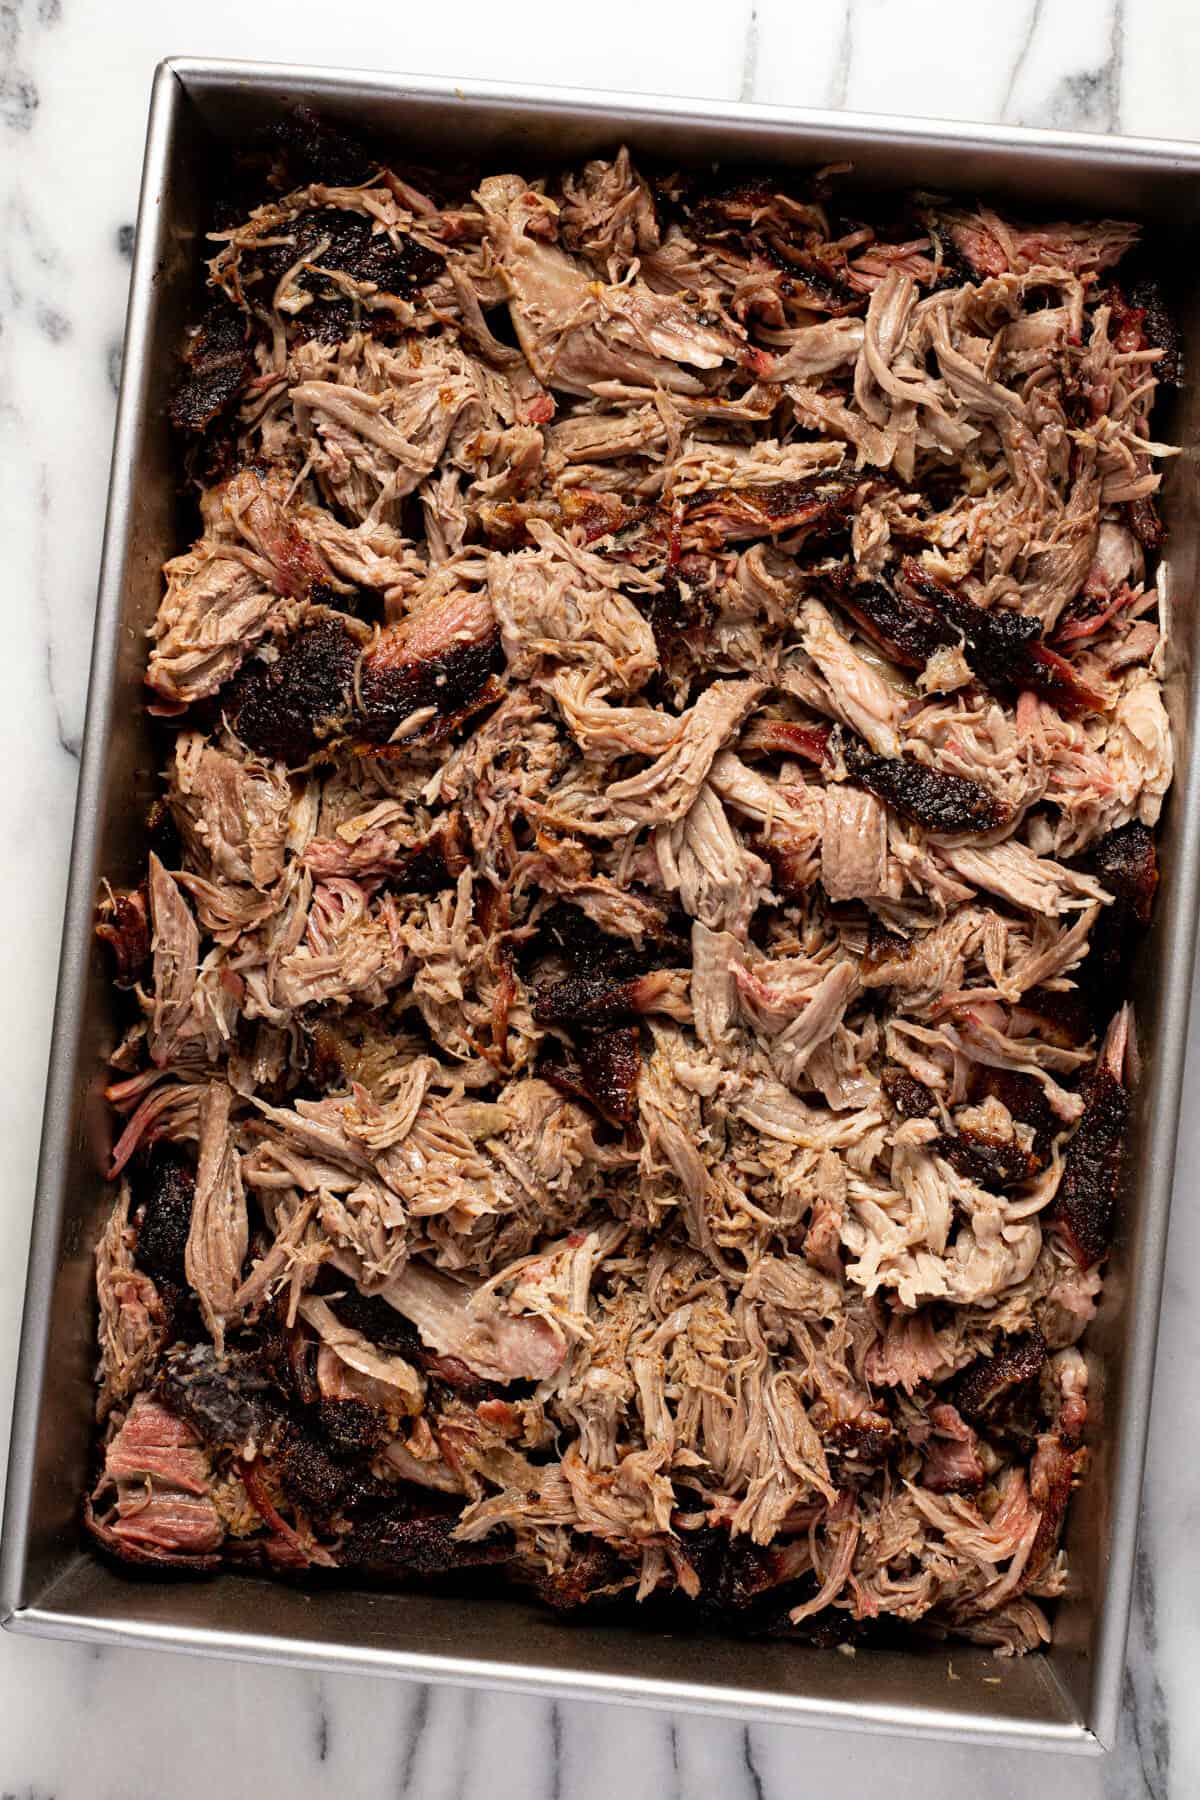 Metal pan filled with shredded smoked pork butt.